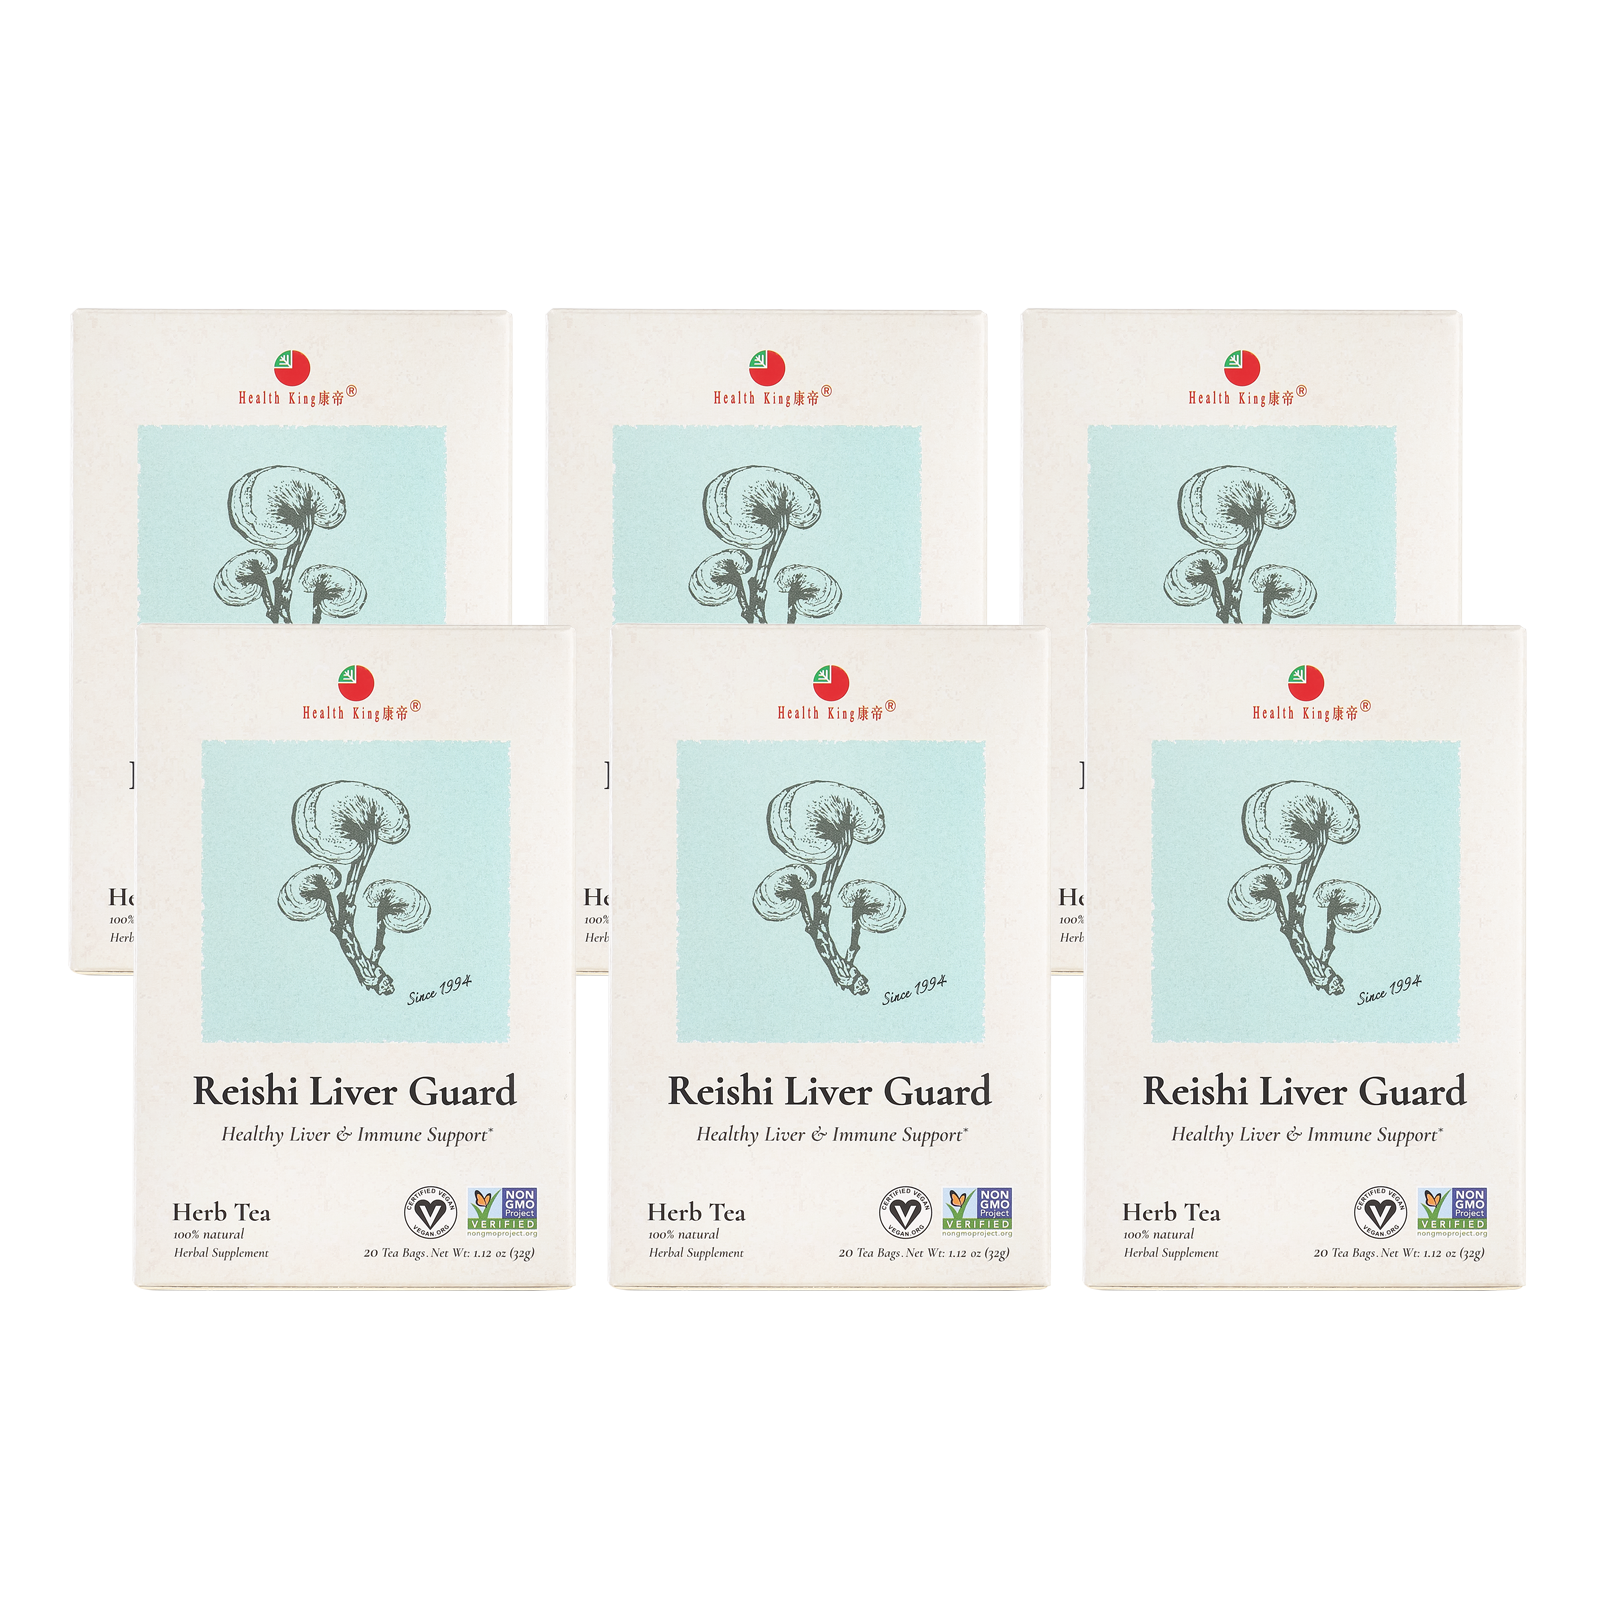 Reishi Liver Guard Herb Tea product packaging